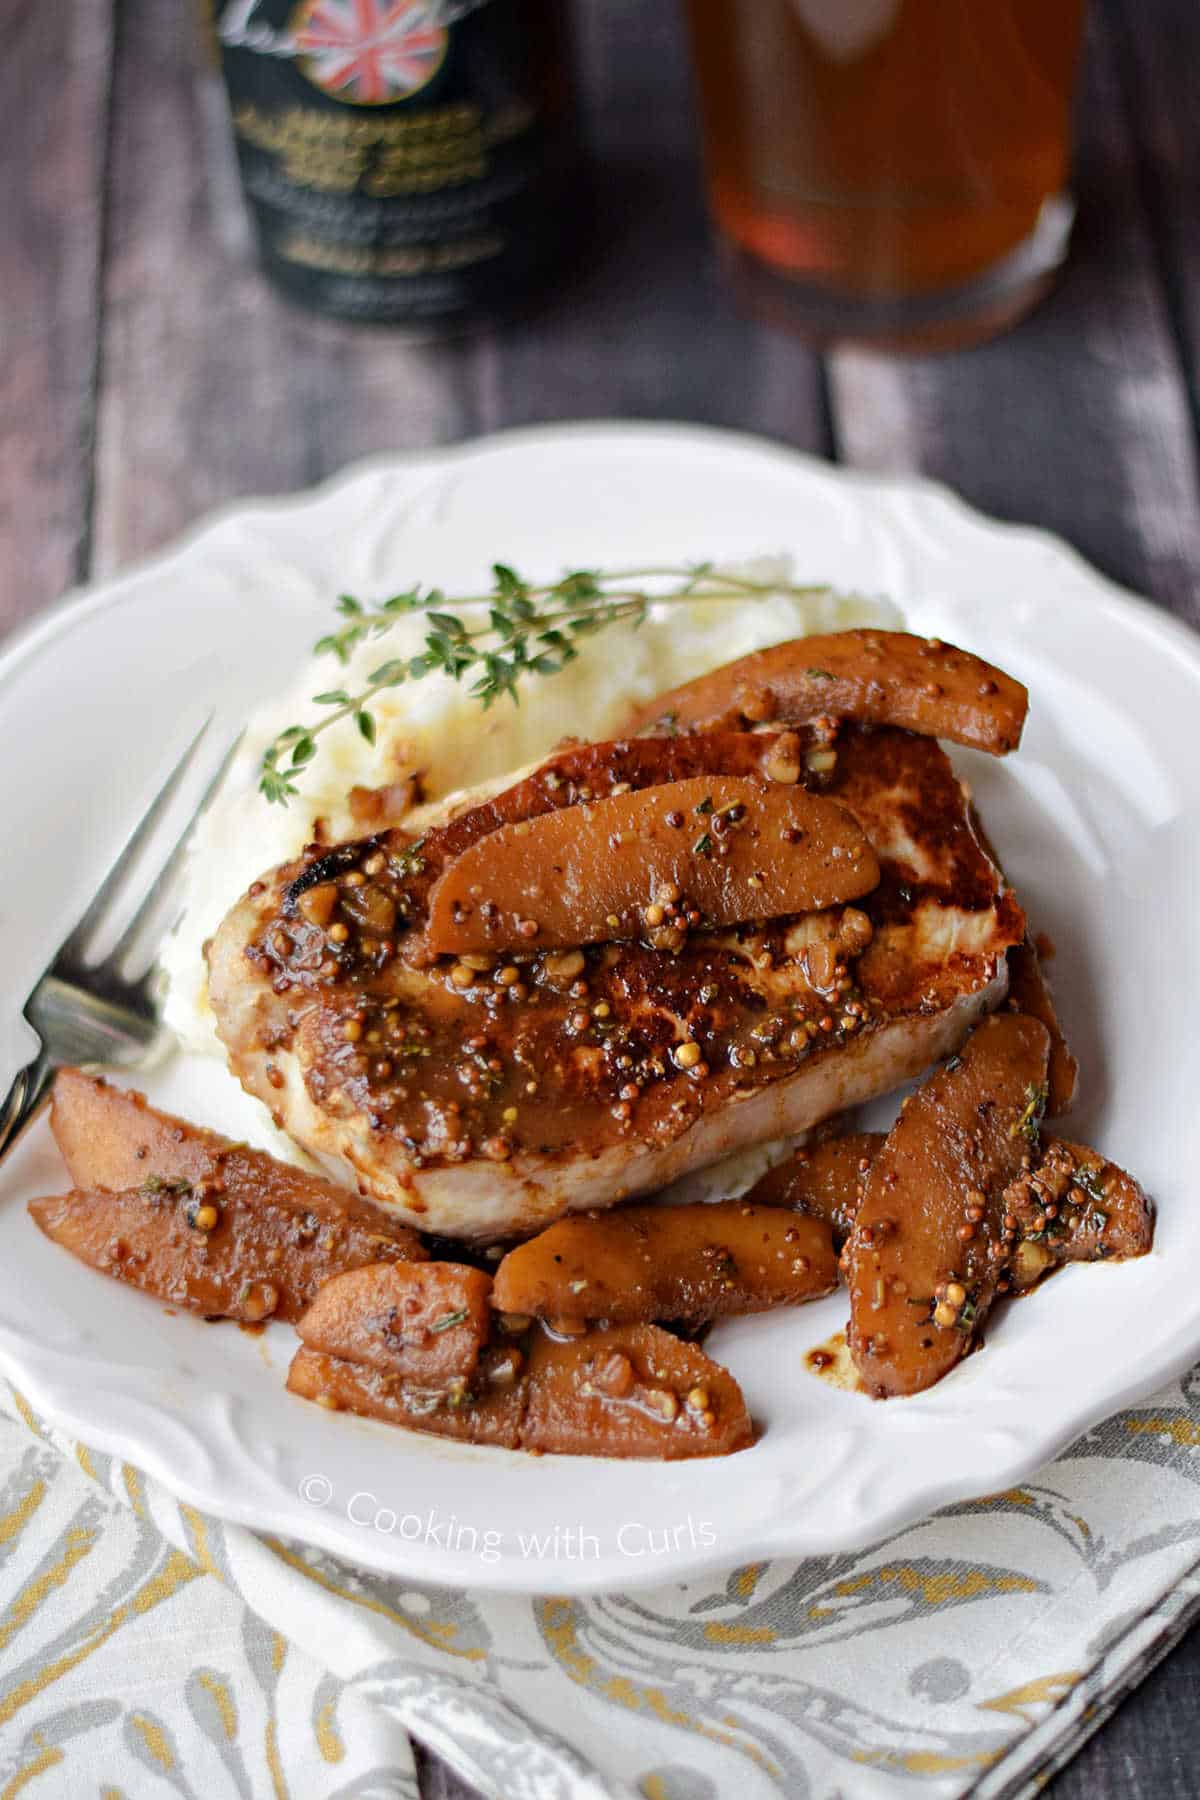 Boneless pork chop topped with apples in cider sauce over mashed potatoes.